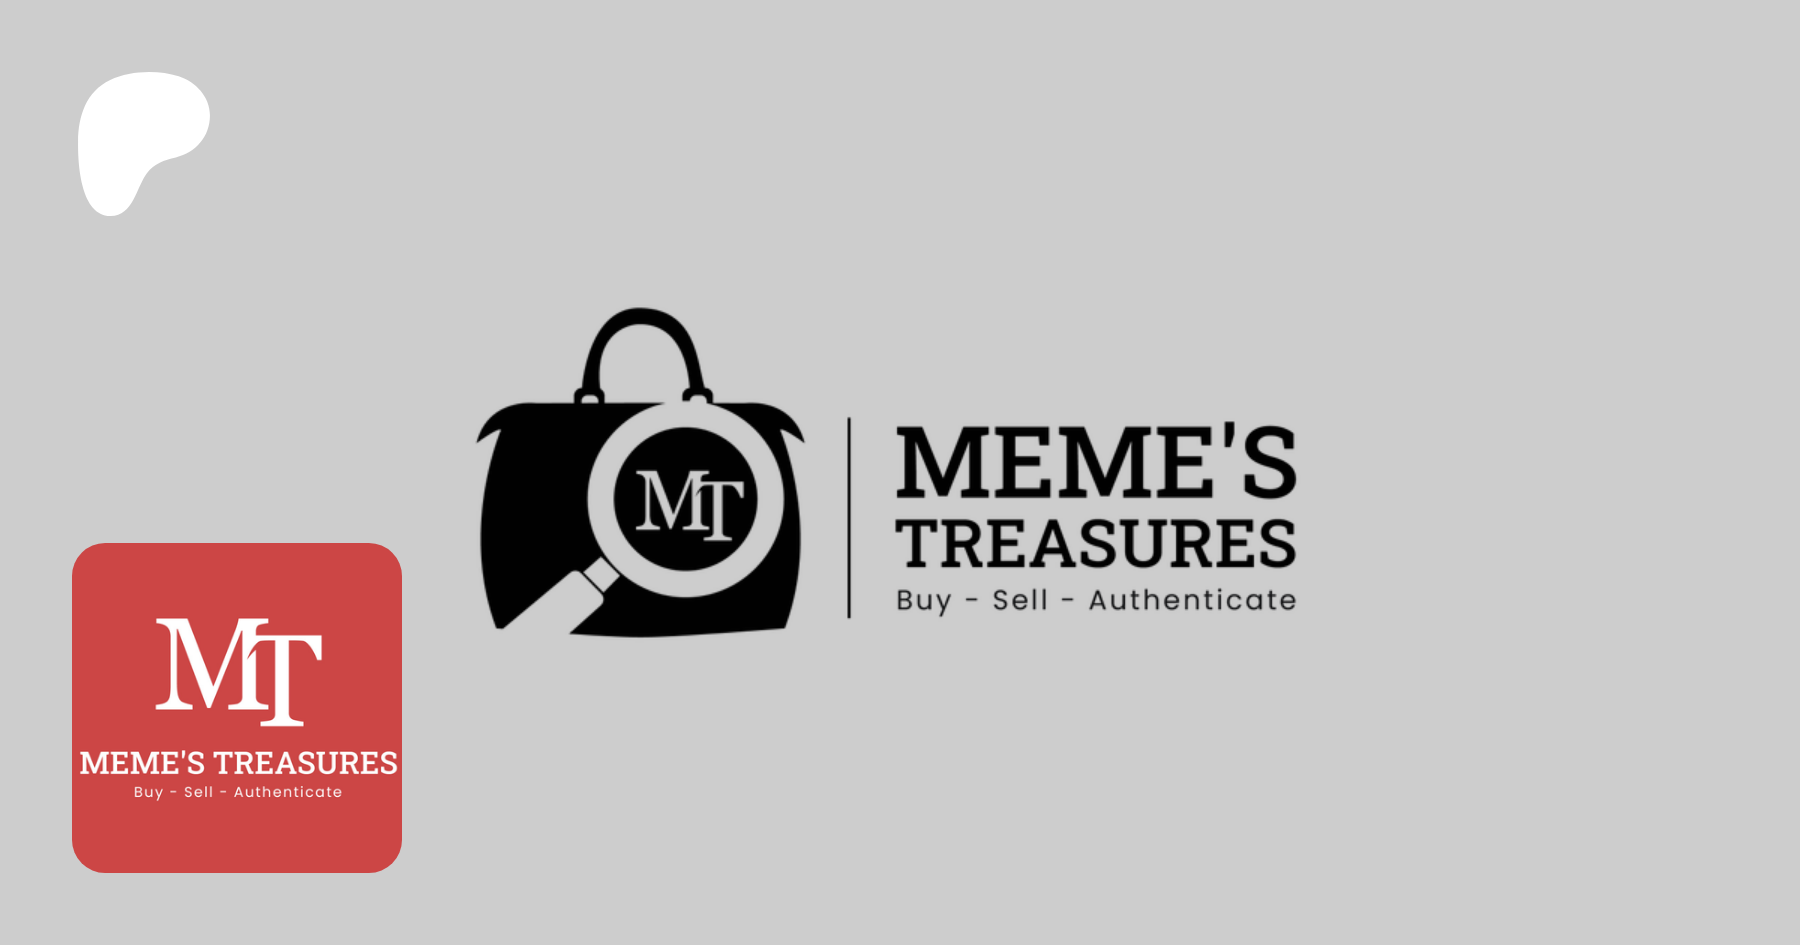 Memes Treasures Sales and Authentication Service - Just in! New